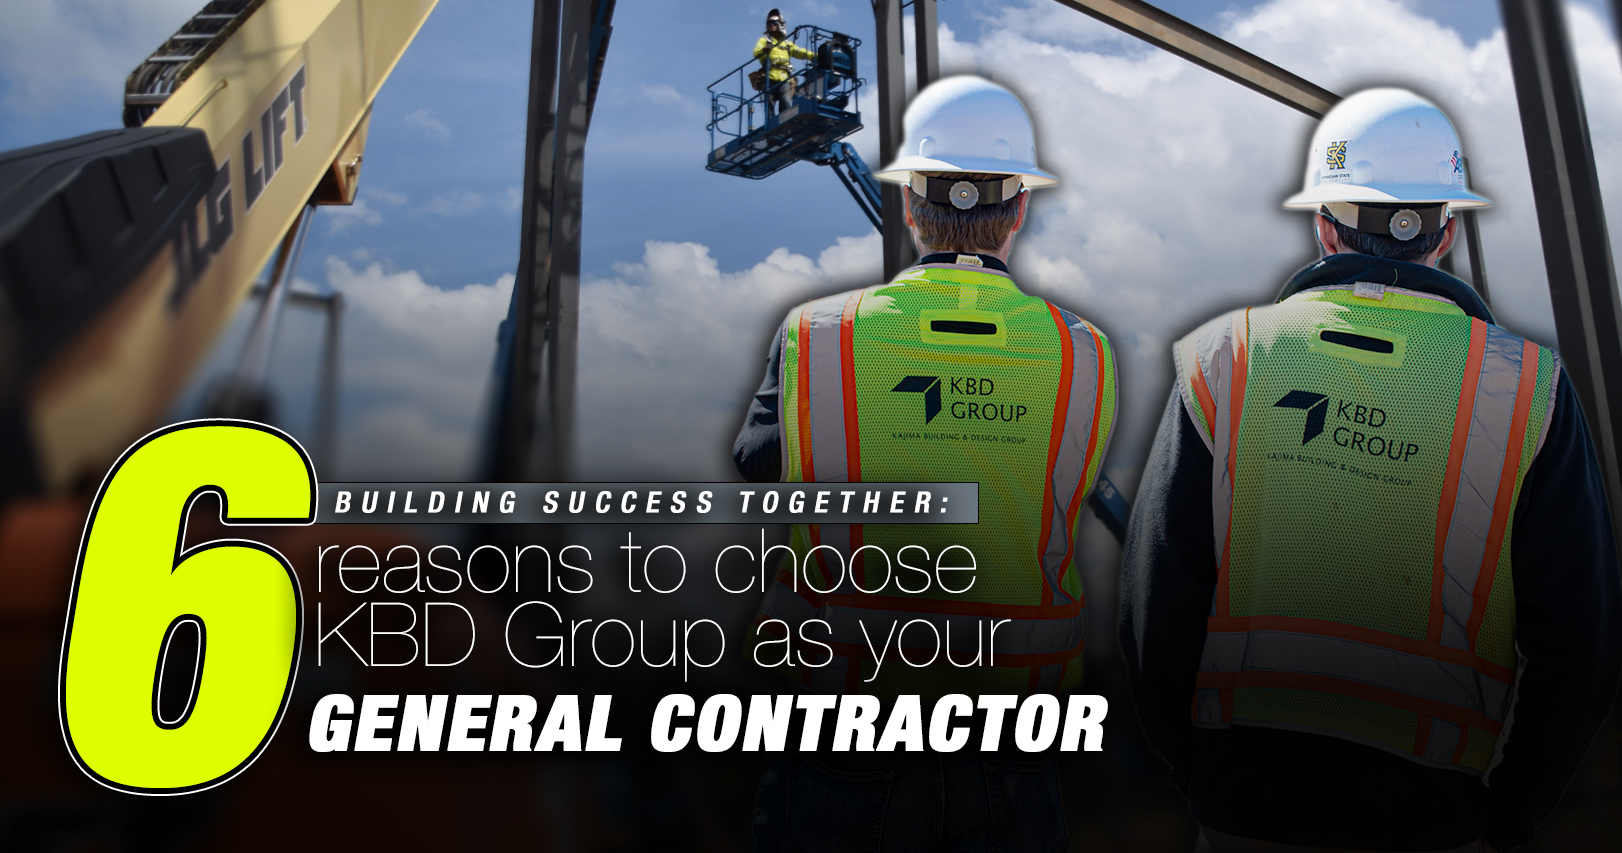 6 Reasons to Choose KBD Group as Your General Contractor